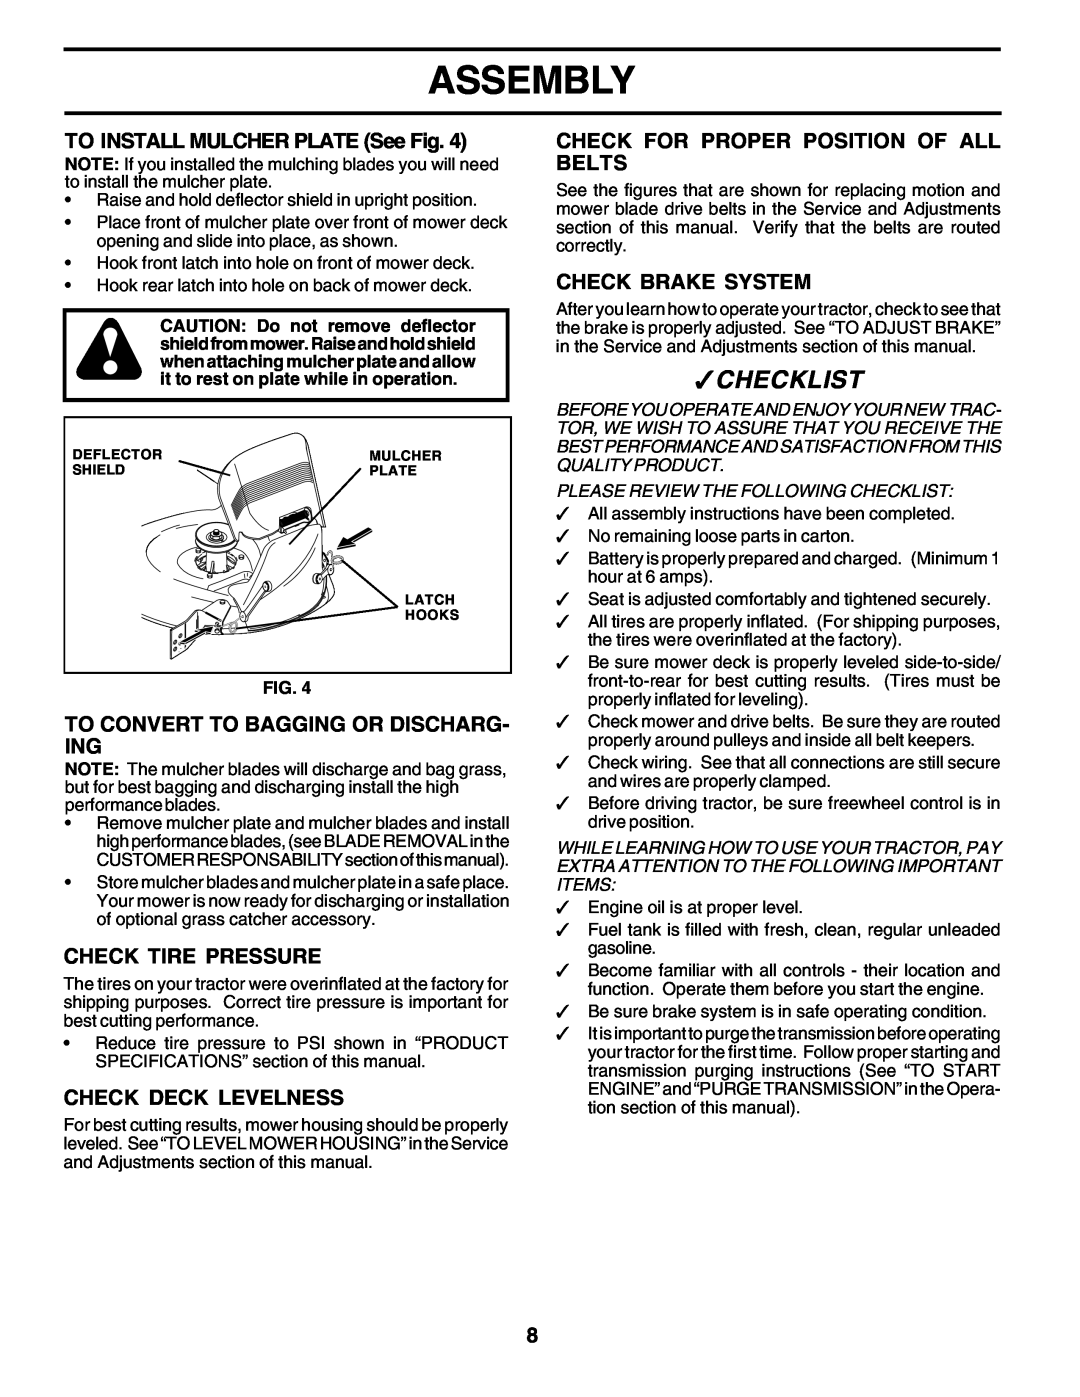 Poulan 180002 owner manual Assembly, 3CHECKLIST, TO INSTALL MULCHER PLATE See Fig, To Convert To Bagging Or Discharg- Ing 